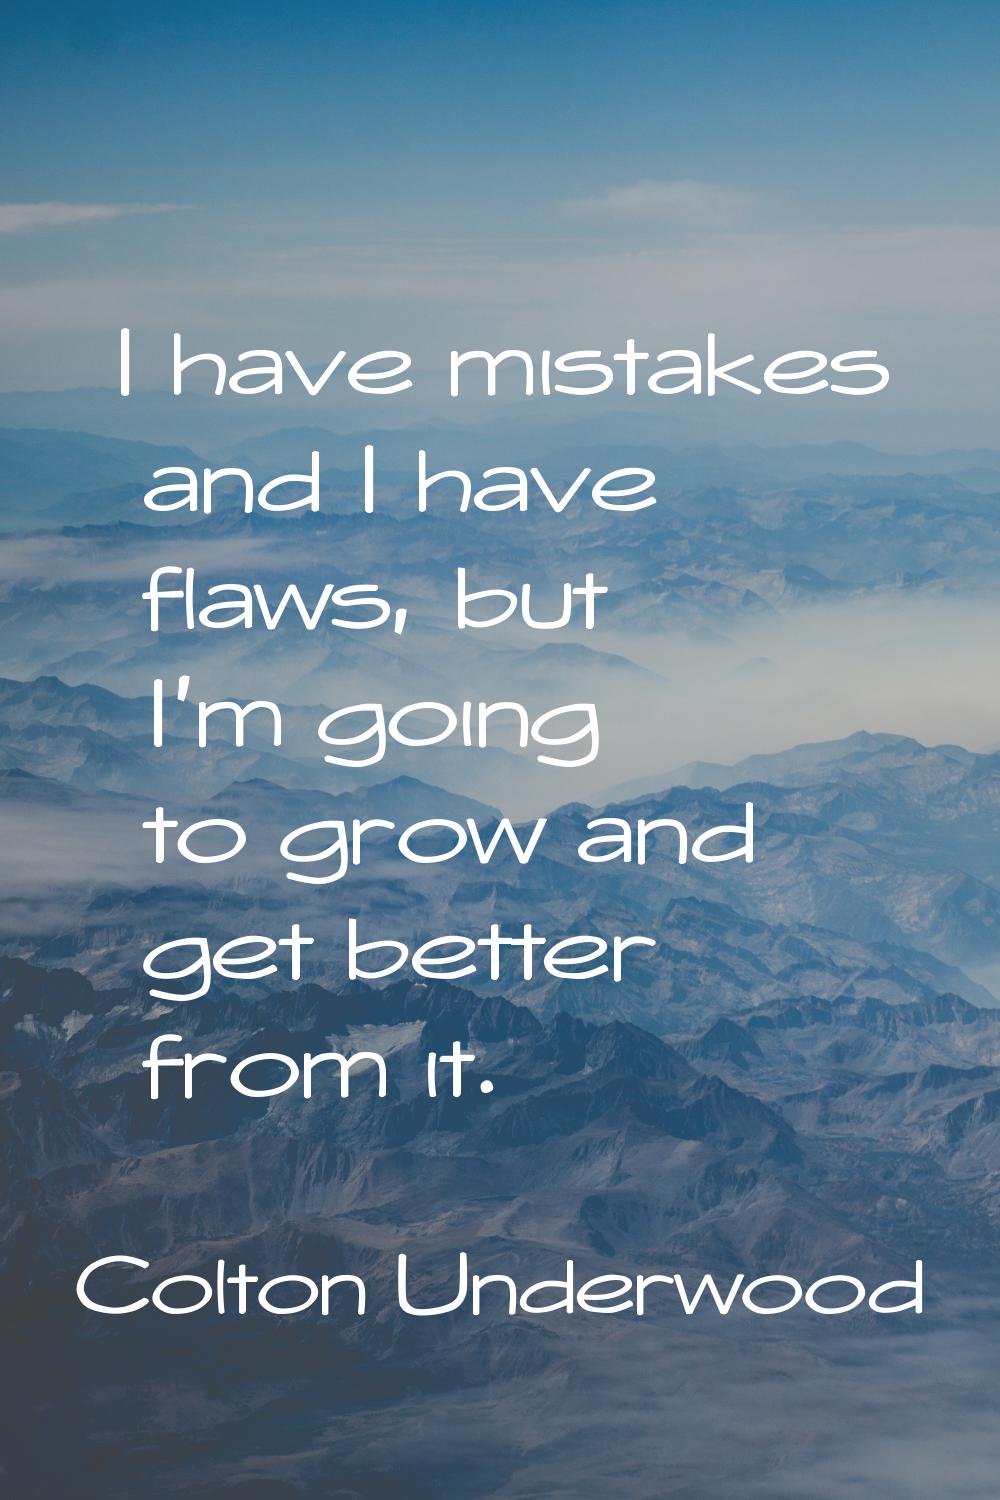 I have mistakes and I have flaws, but I'm going to grow and get better from it.